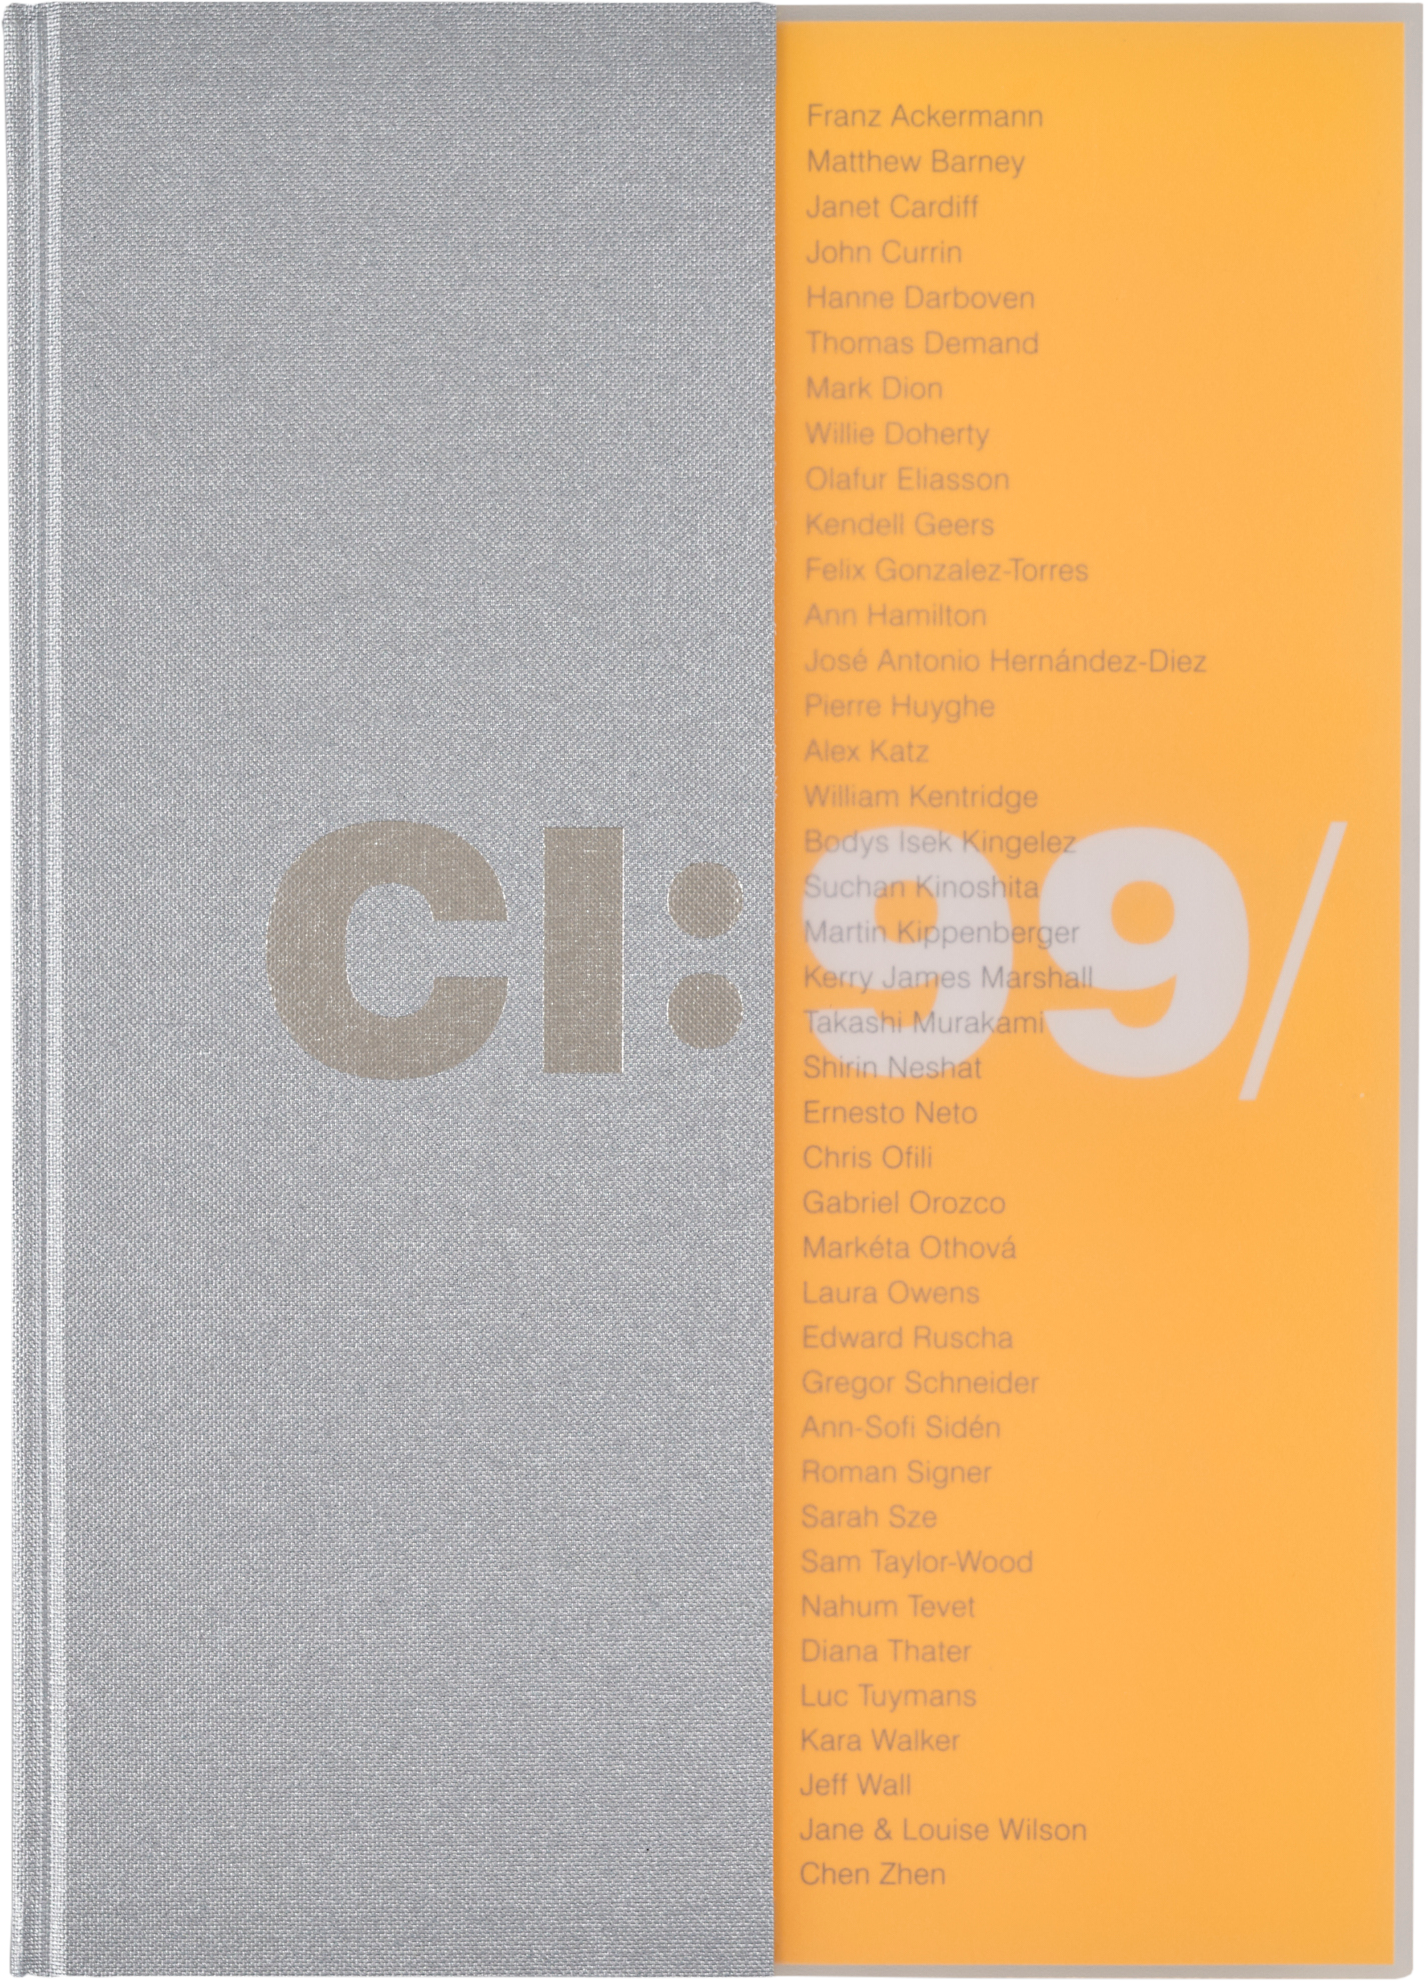 Silver and yellow book cover titled CI:99